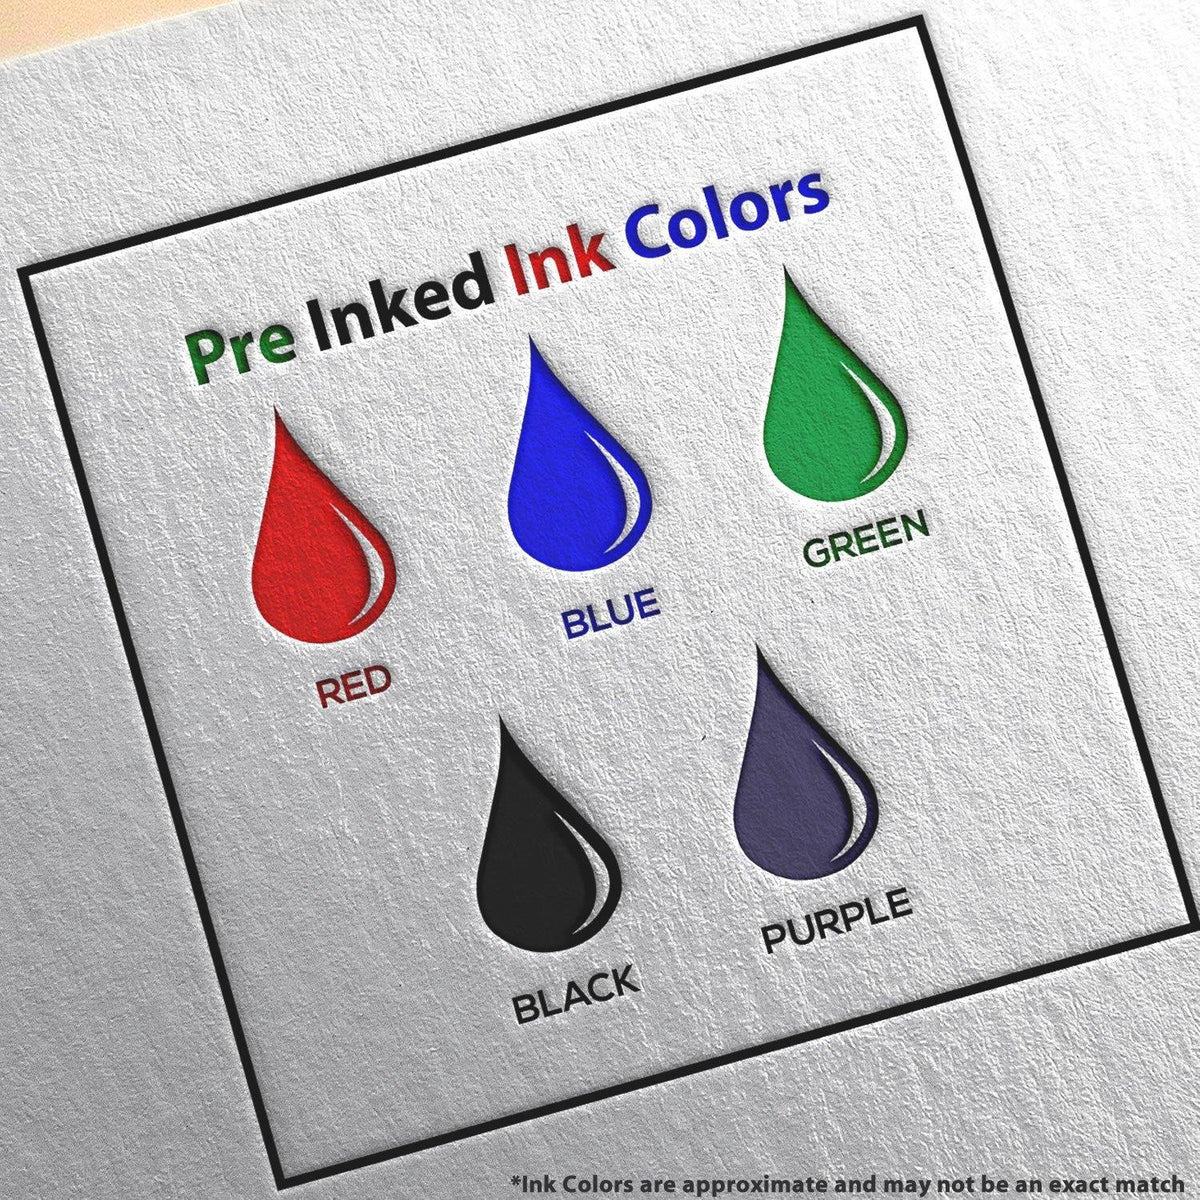 Large Pre-Inked Courtesy Copy Original Filed Electronically Stamp Ink Color Options